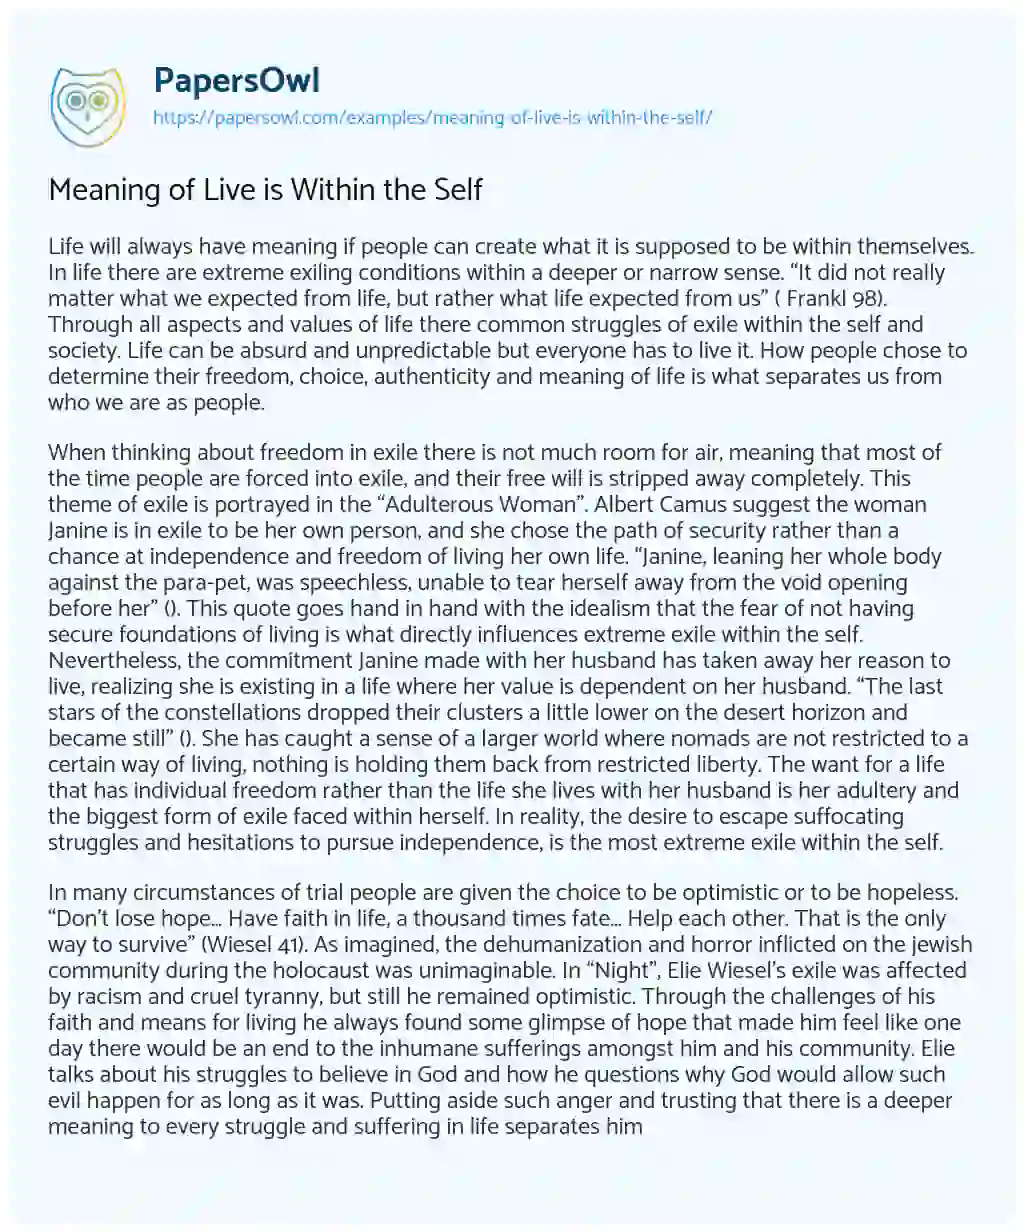 Essay on Meaning of Live is Within the Self